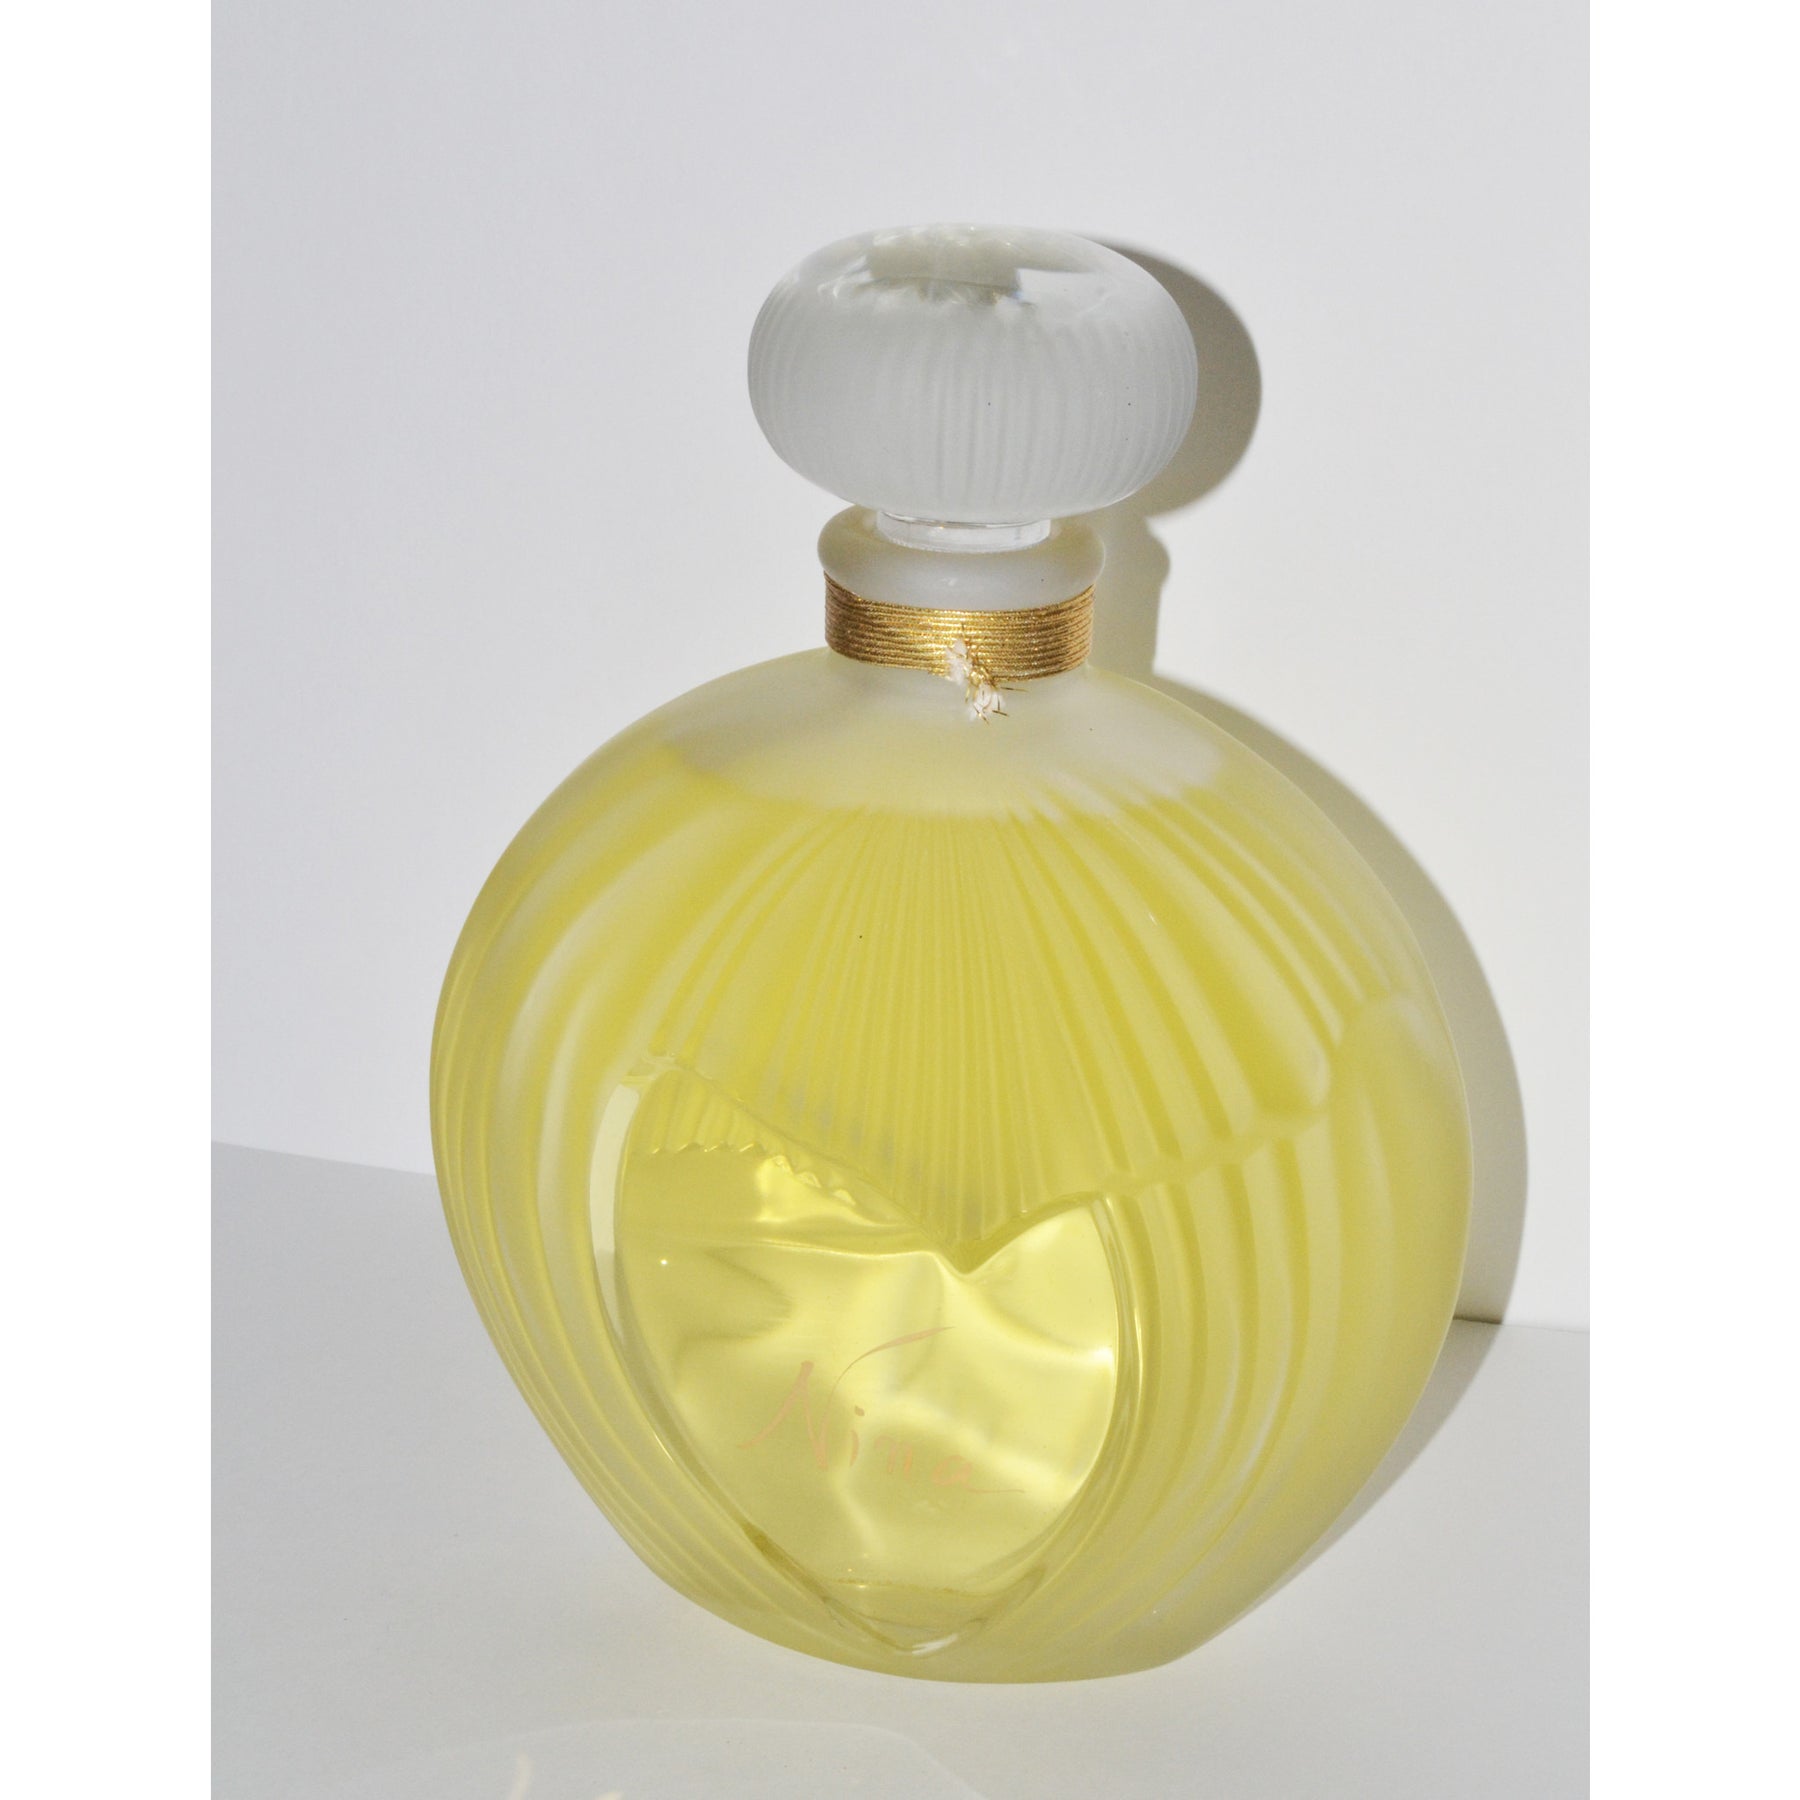 Vintage Nina Lalique Perfume Factice By Nina Riccii – Quirky Finds